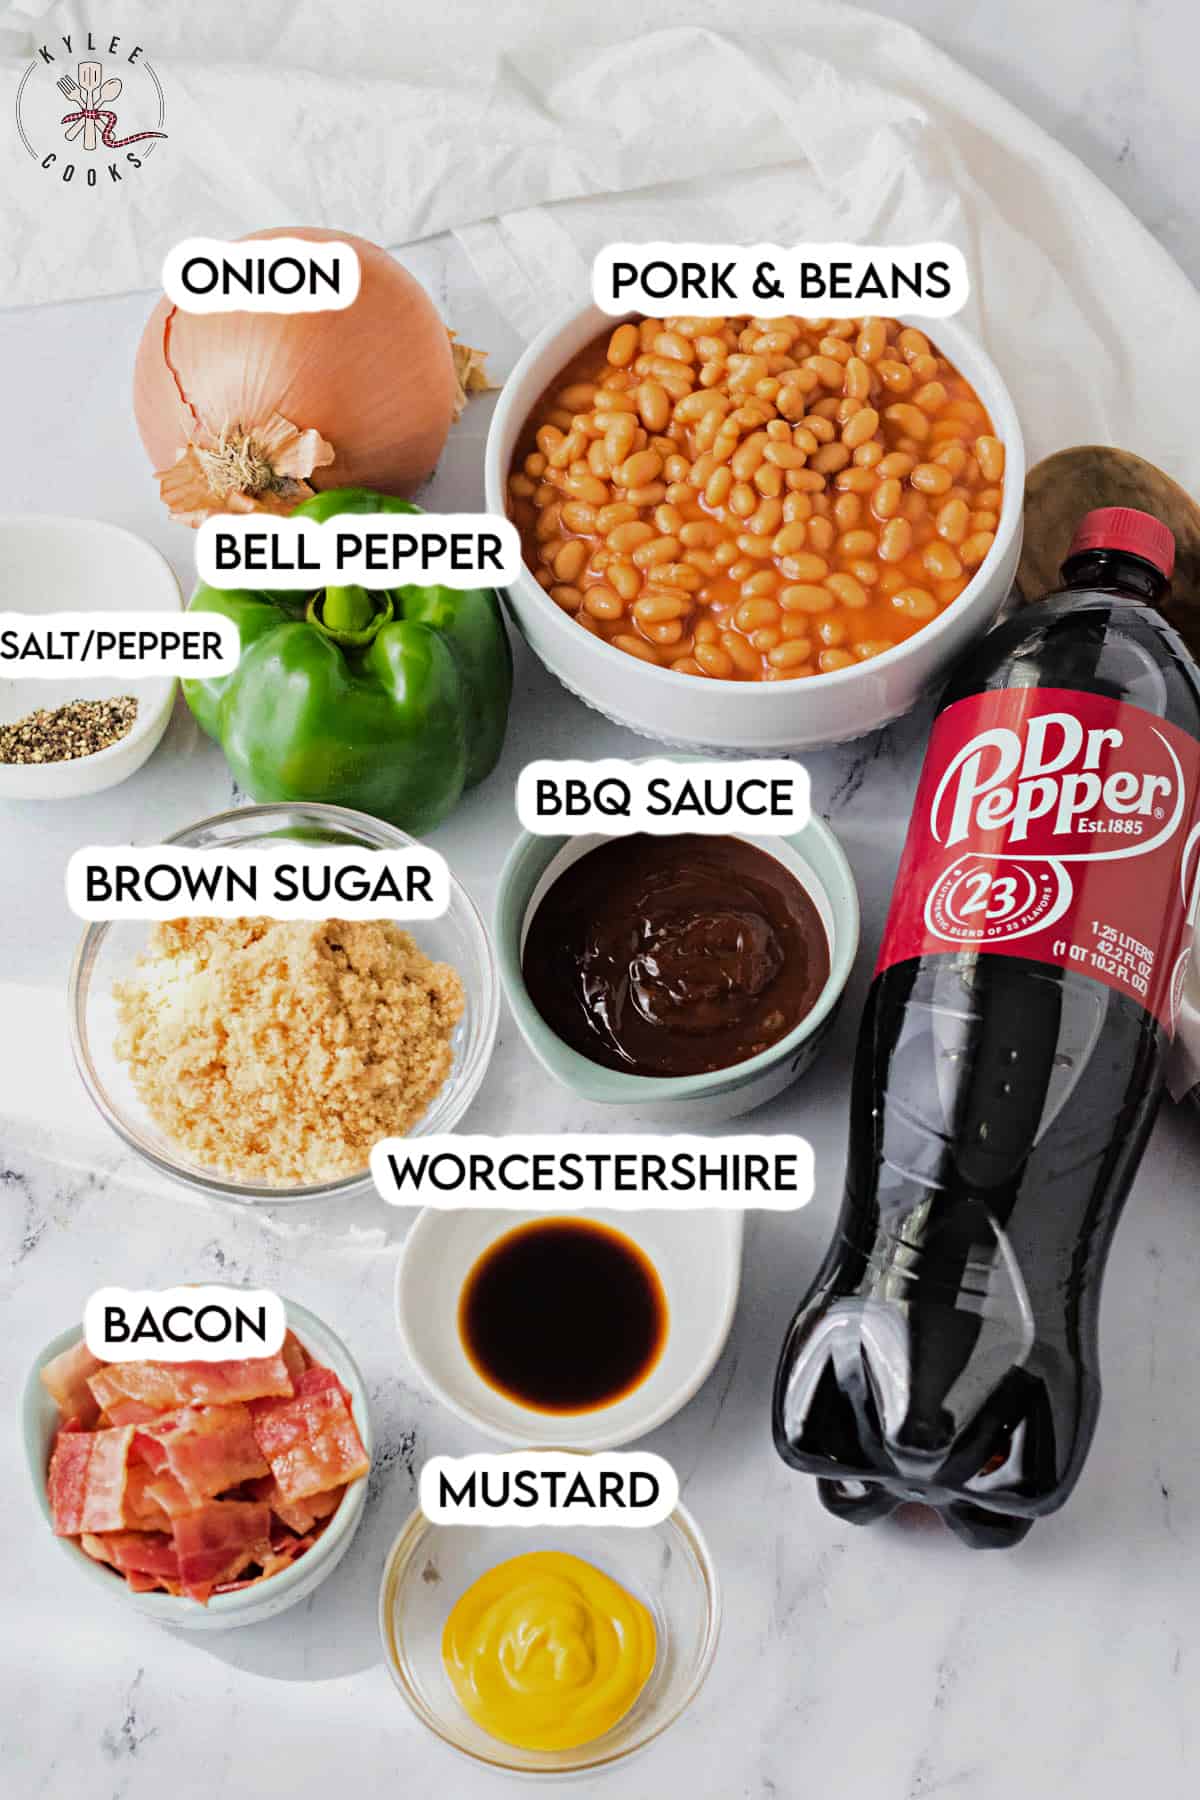 ingredients to make dr pepper baked beans laid out and labeled.